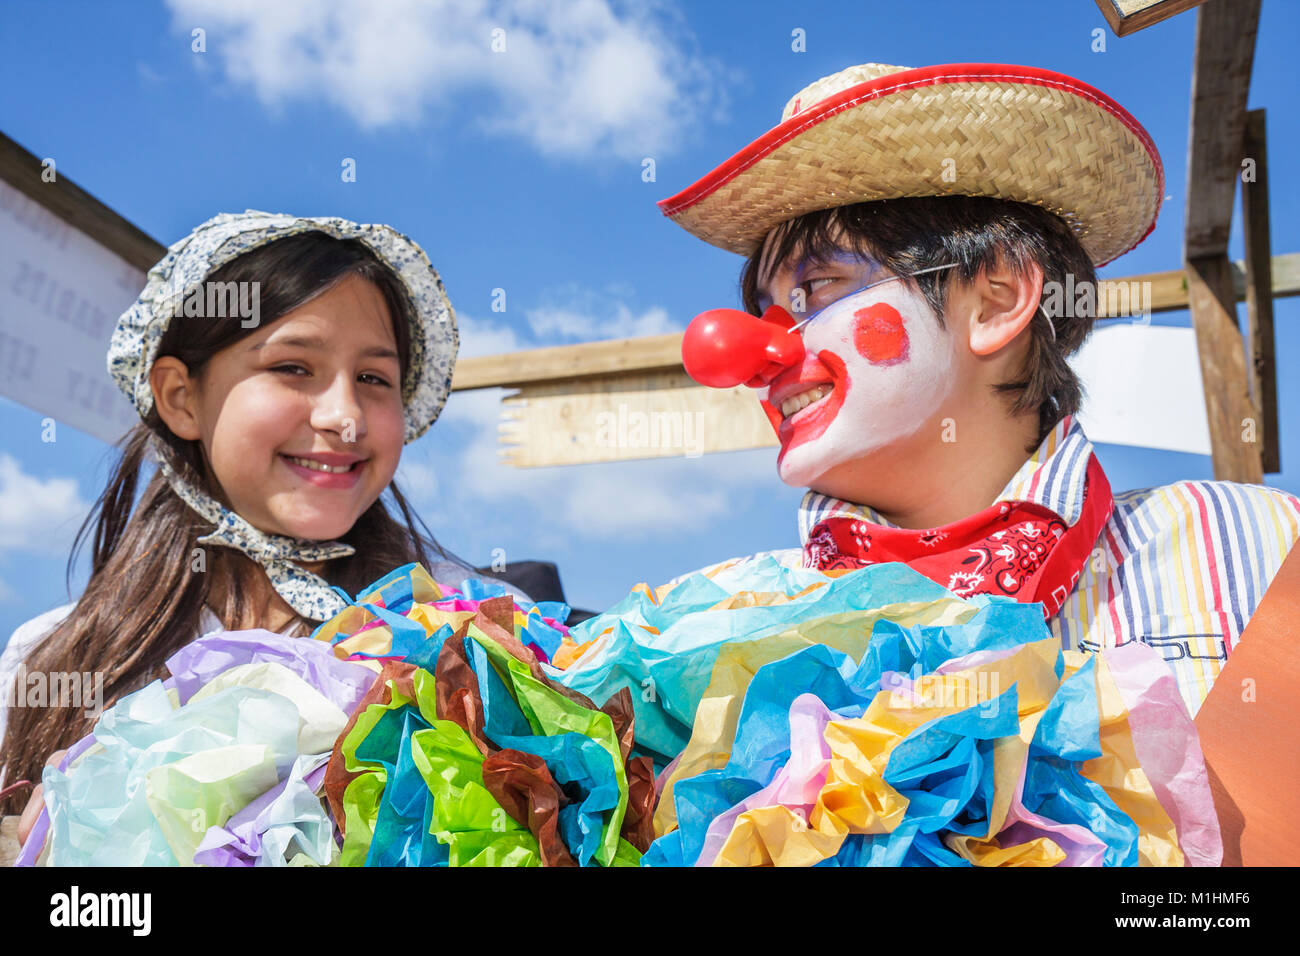 Miami Florida,Homestead,Rodeo Parade,participant,community event,tradition,clown,girl girls,female kid kids child children youngster youngsters youth Stock Photo